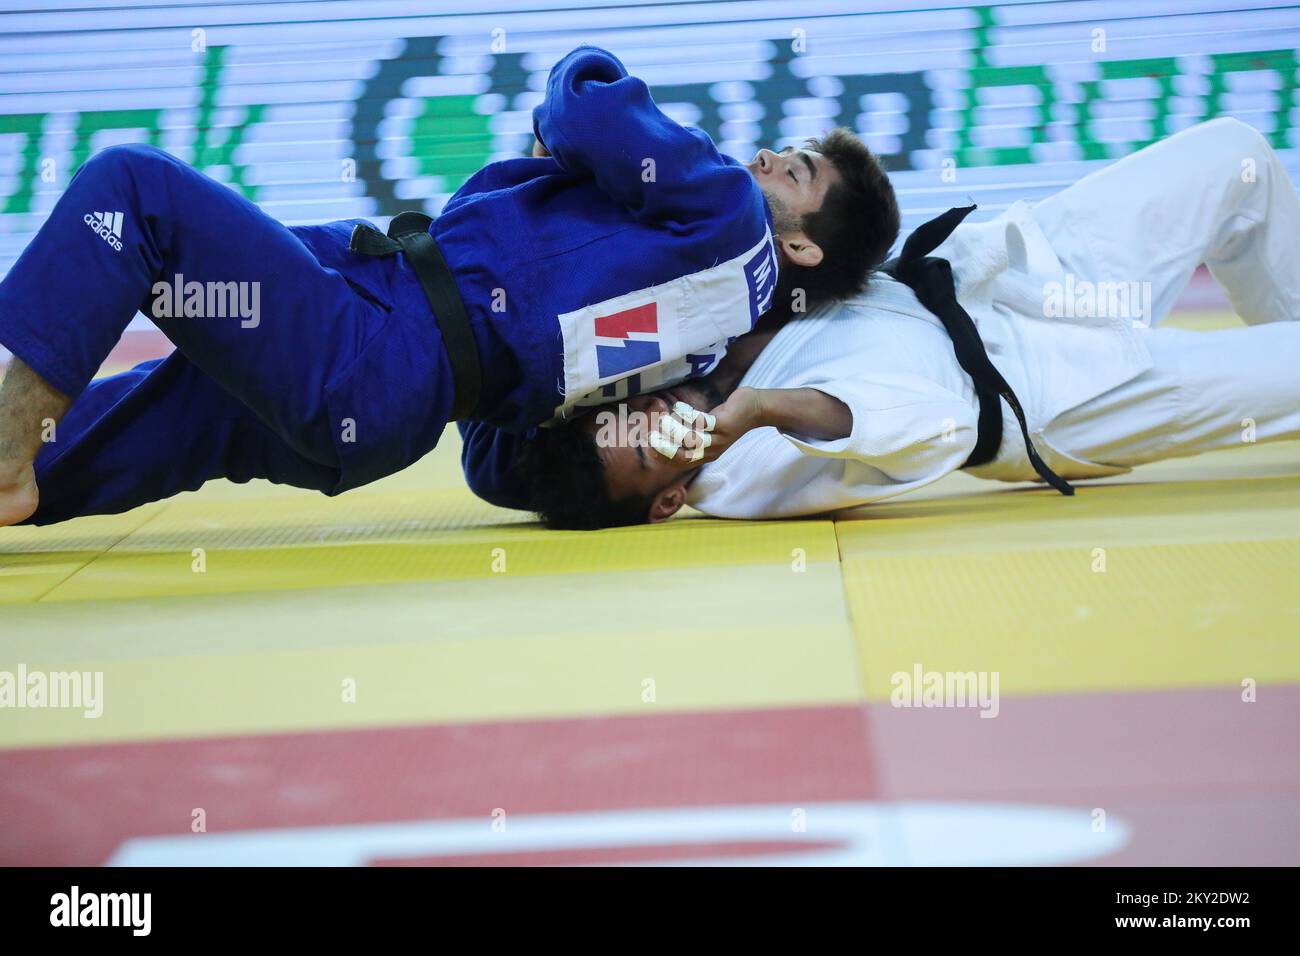 Manuel Lombardo of Italy in a fight against Magdiel Estrada of Cuba in the  category of men up to 73kg during the IJF World Tour Zagreb Grand Prix,  held at the Zagreb